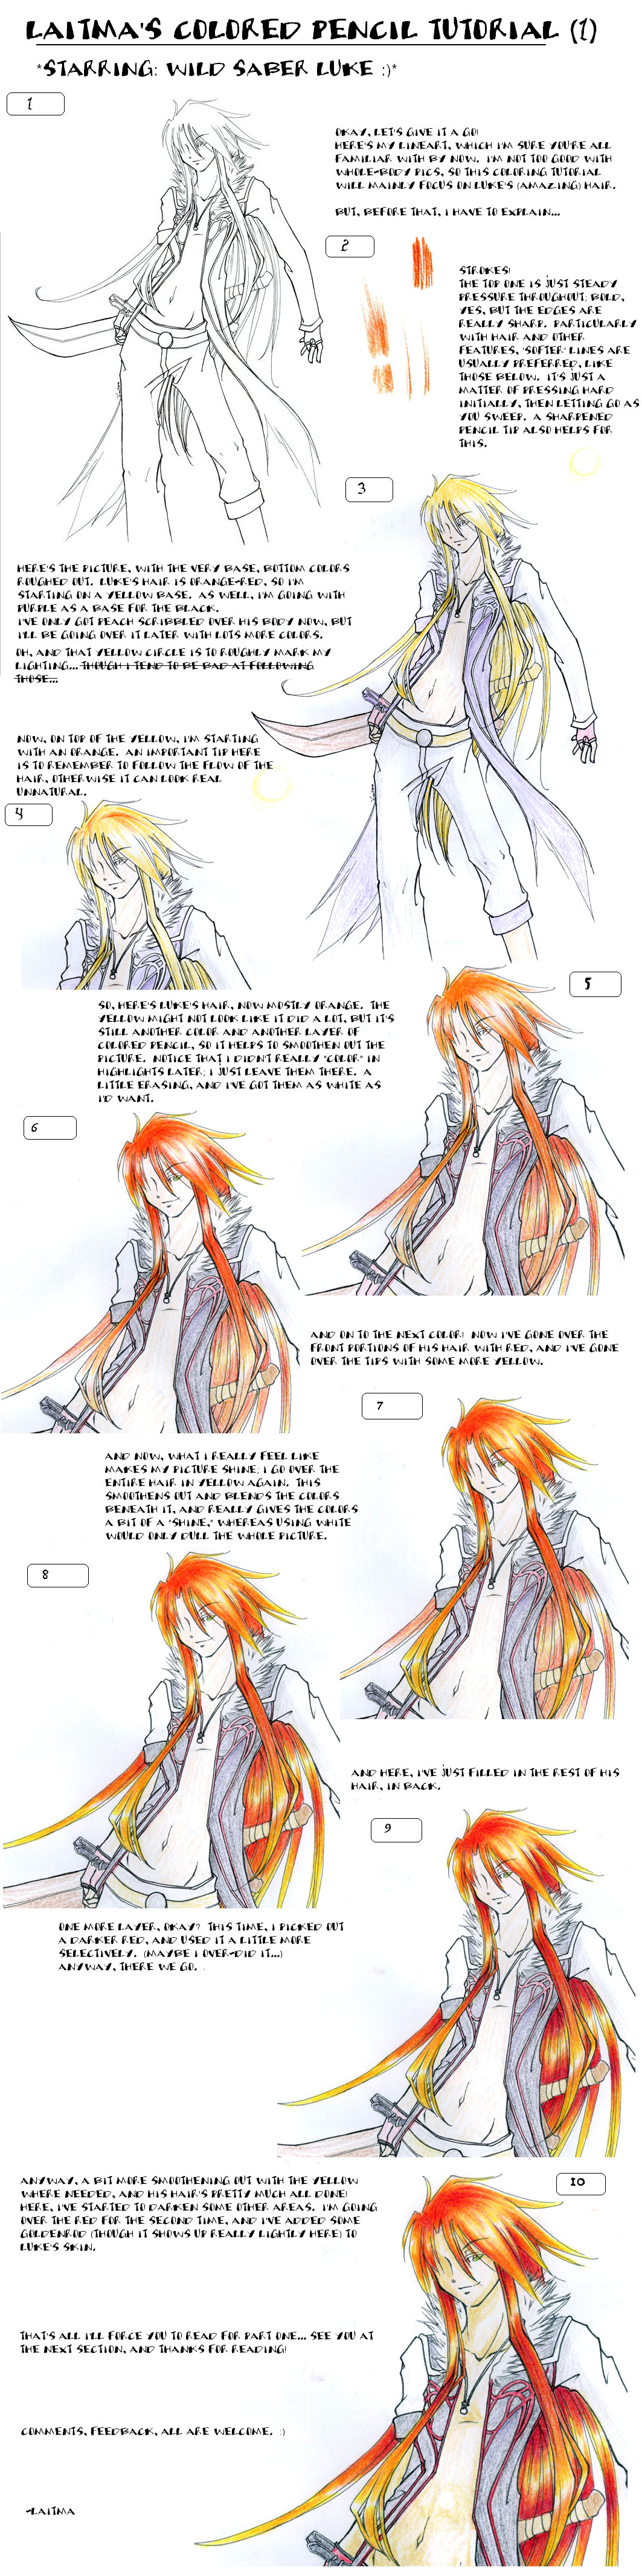 Coloring Tutorial [Part 1] by Trinity_Fire